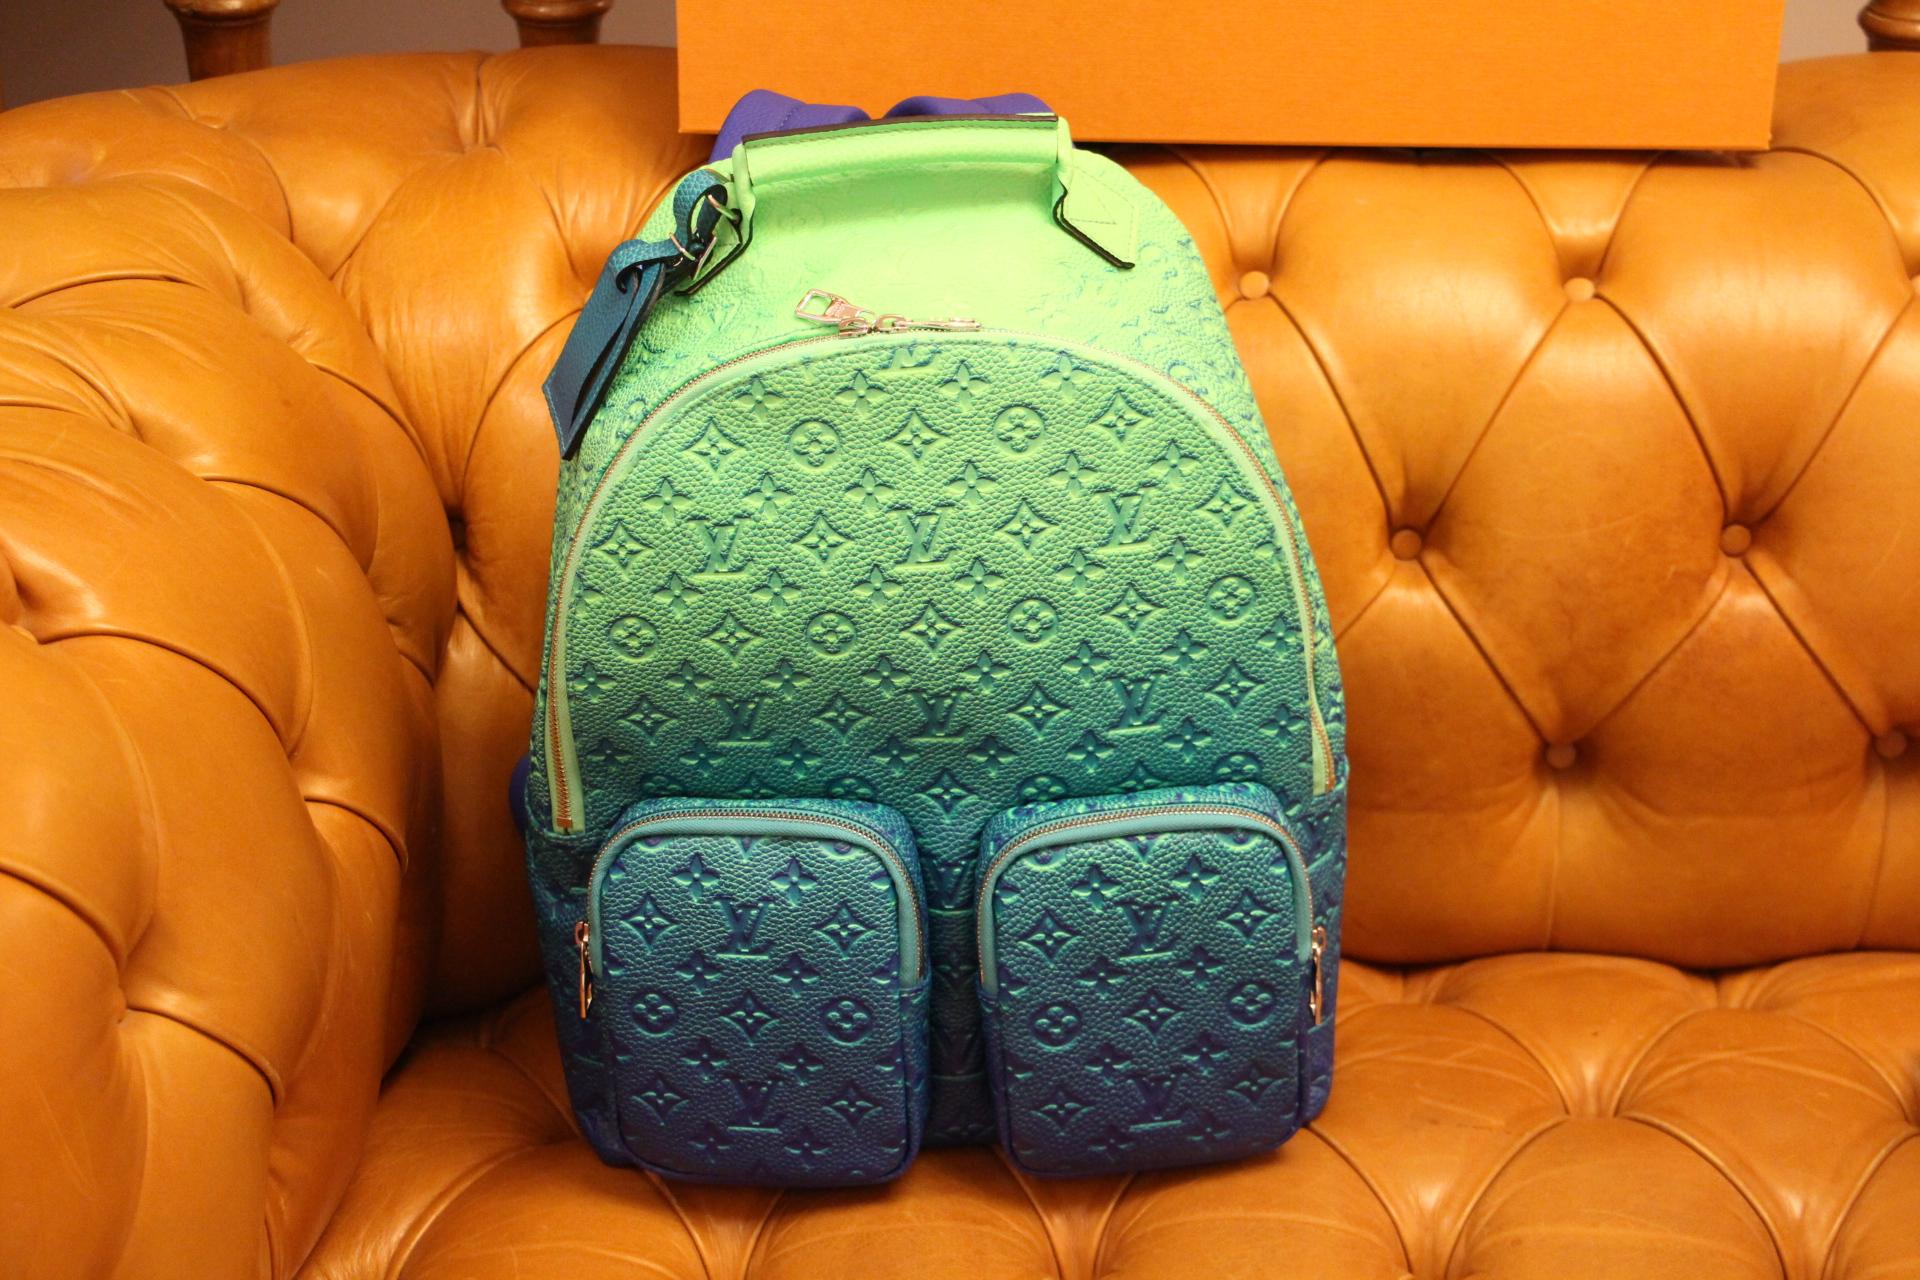 Louis Vuitton Multipockets Backpack Taurillon Illusion Blue/Green for Men